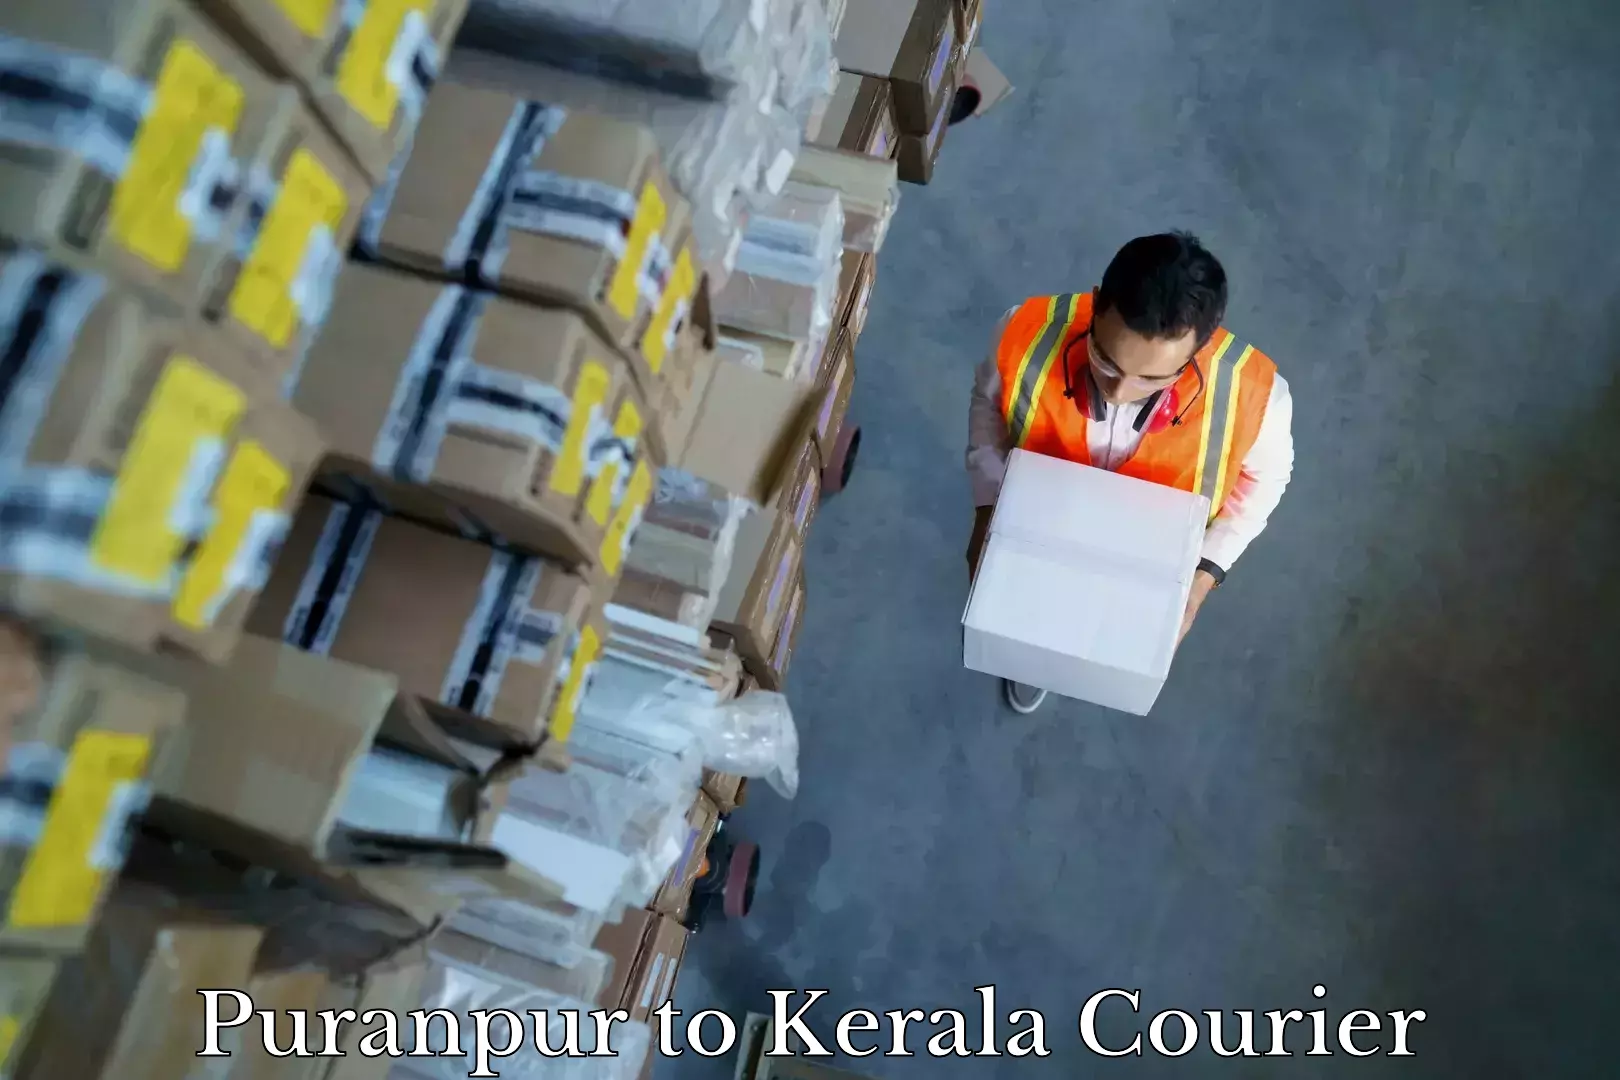 Budget-friendly movers Puranpur to Kozhikode